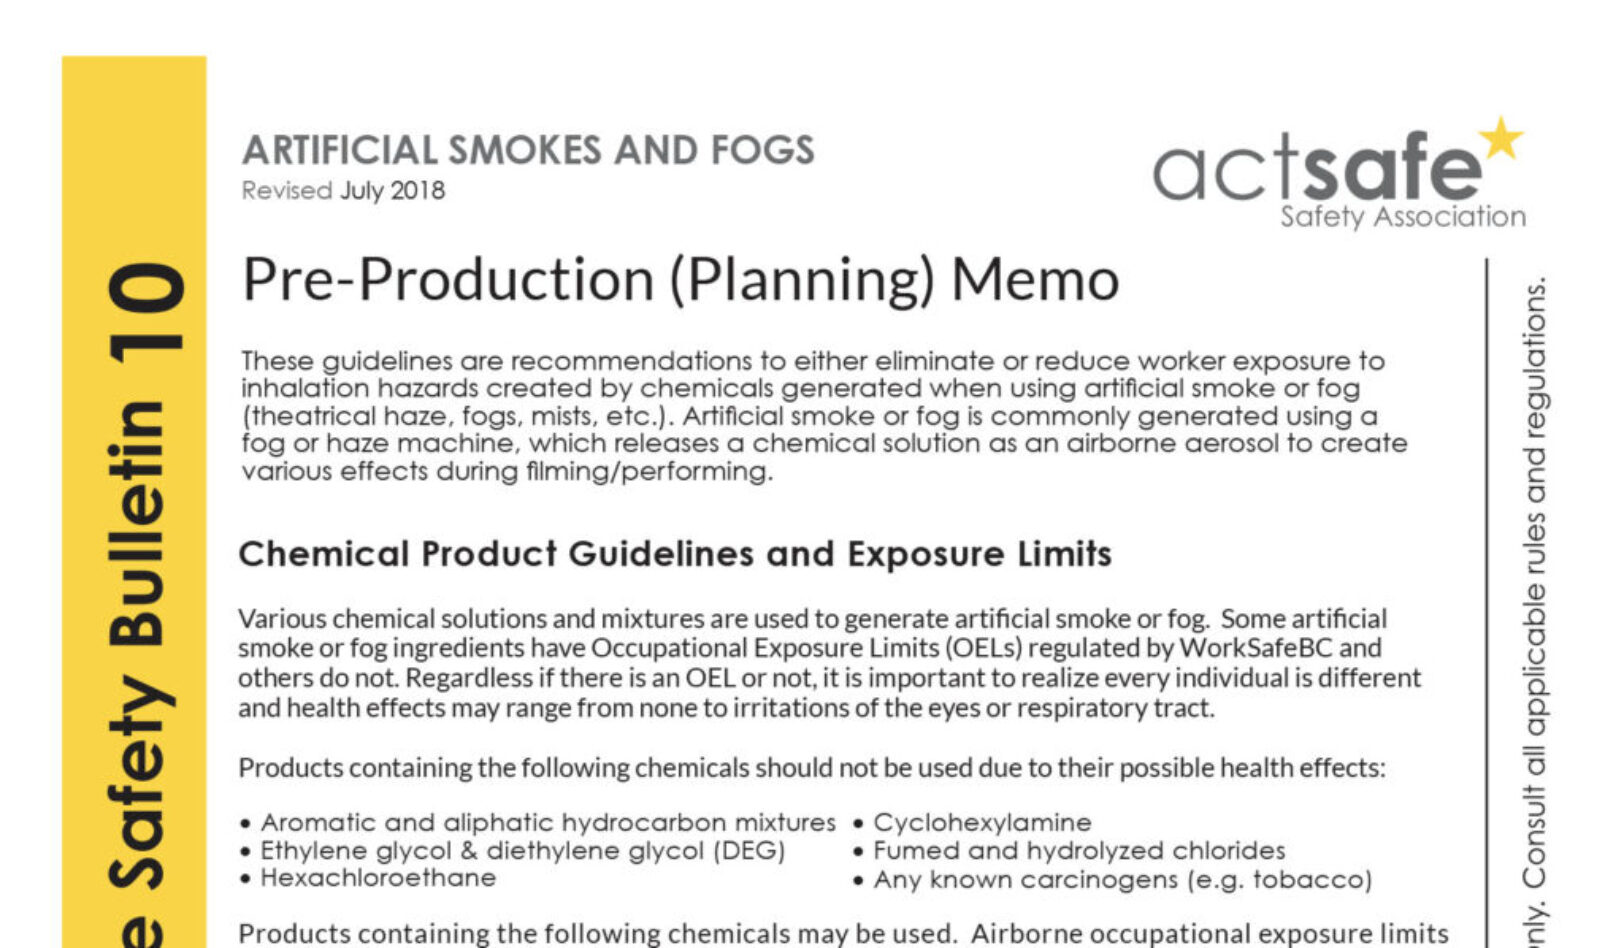 Artificial Smokes and Fogs